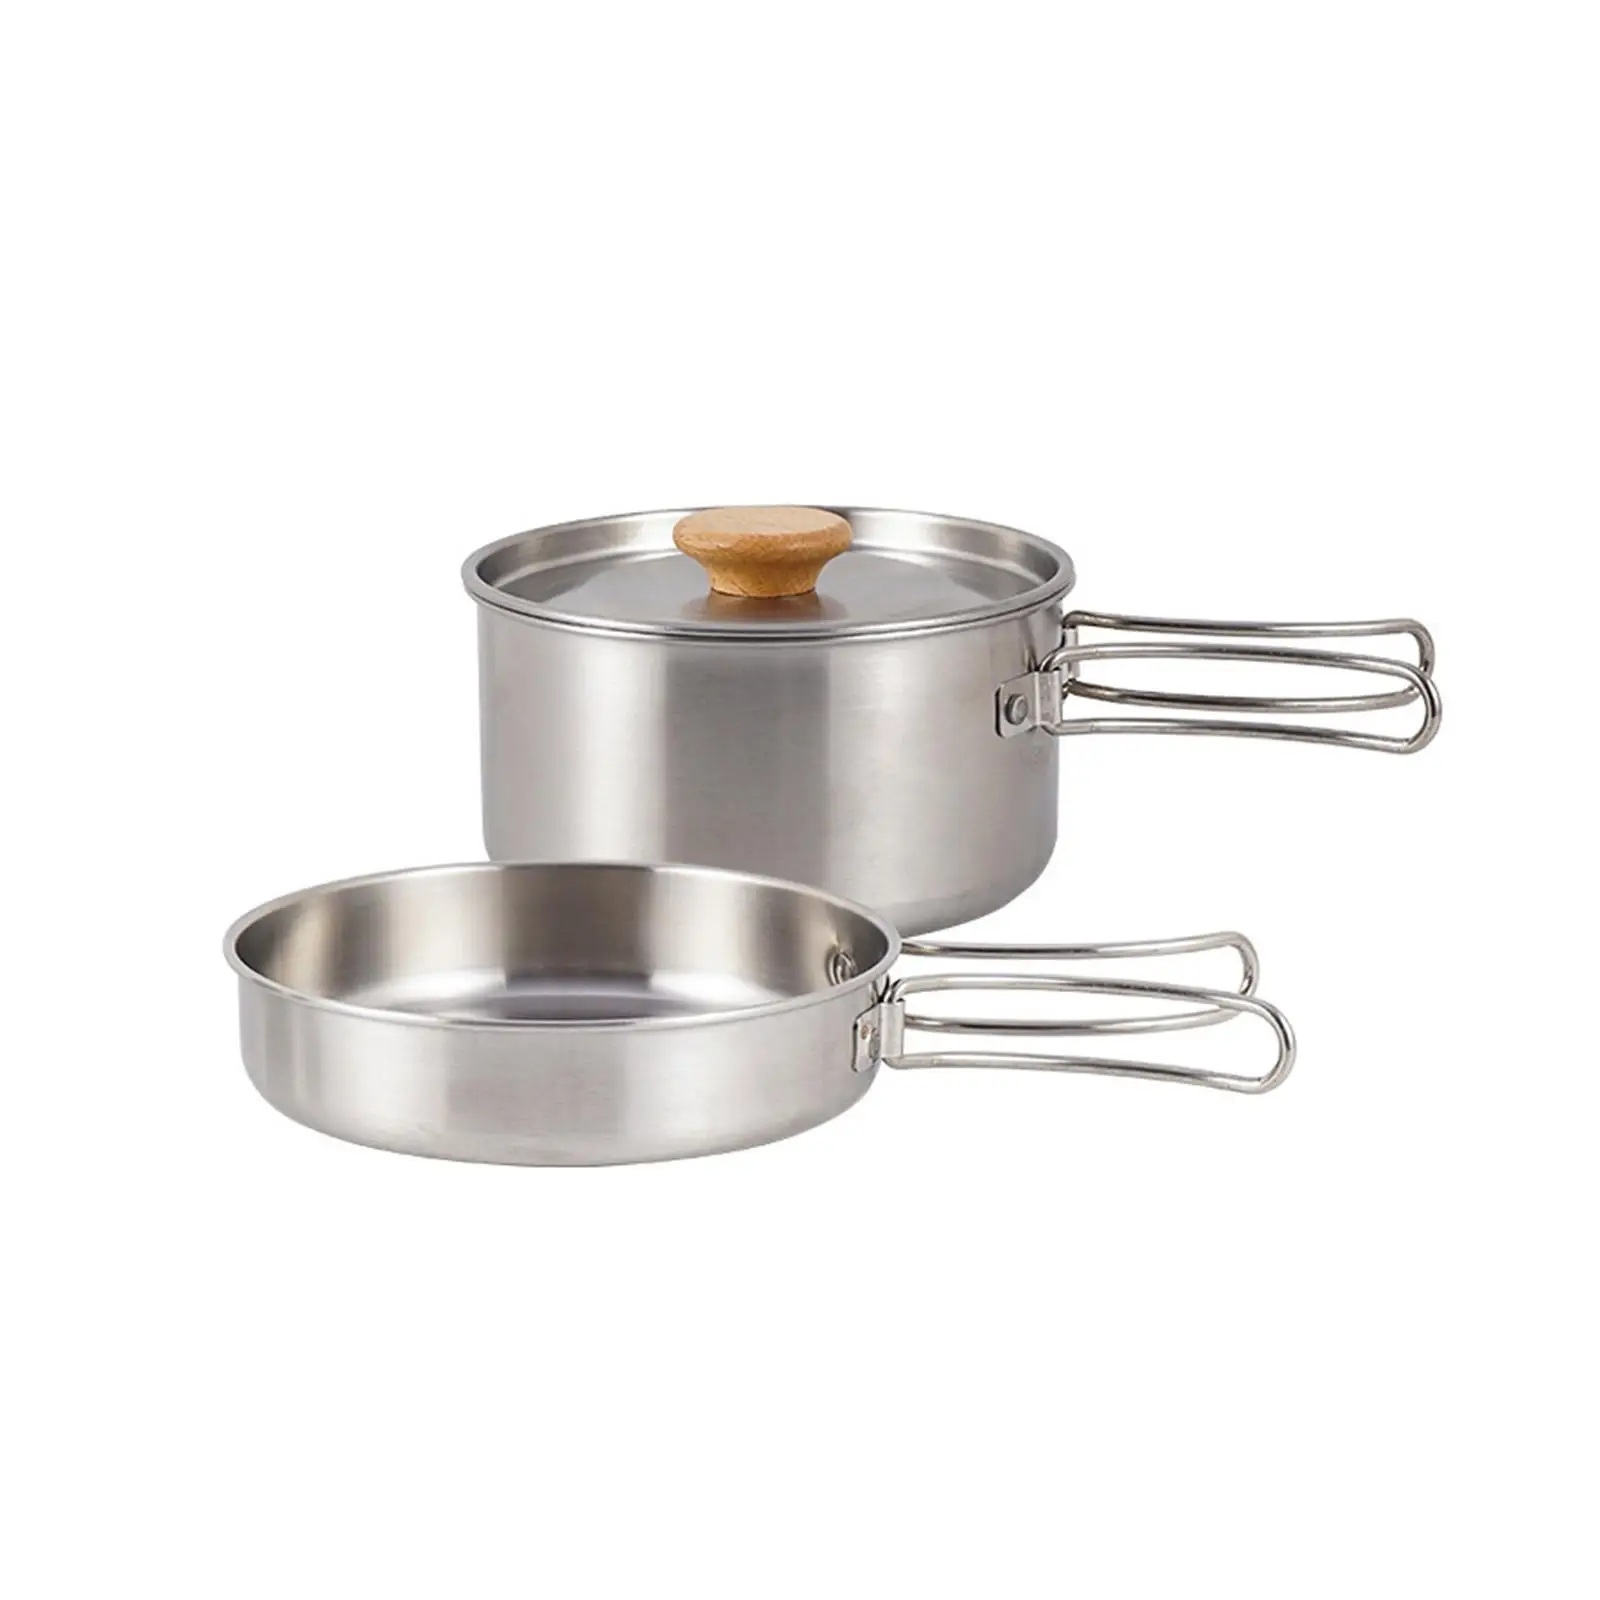 Camping Pots Pans Portable Stainless Steel Cookware Tableware Easily Clean Heat